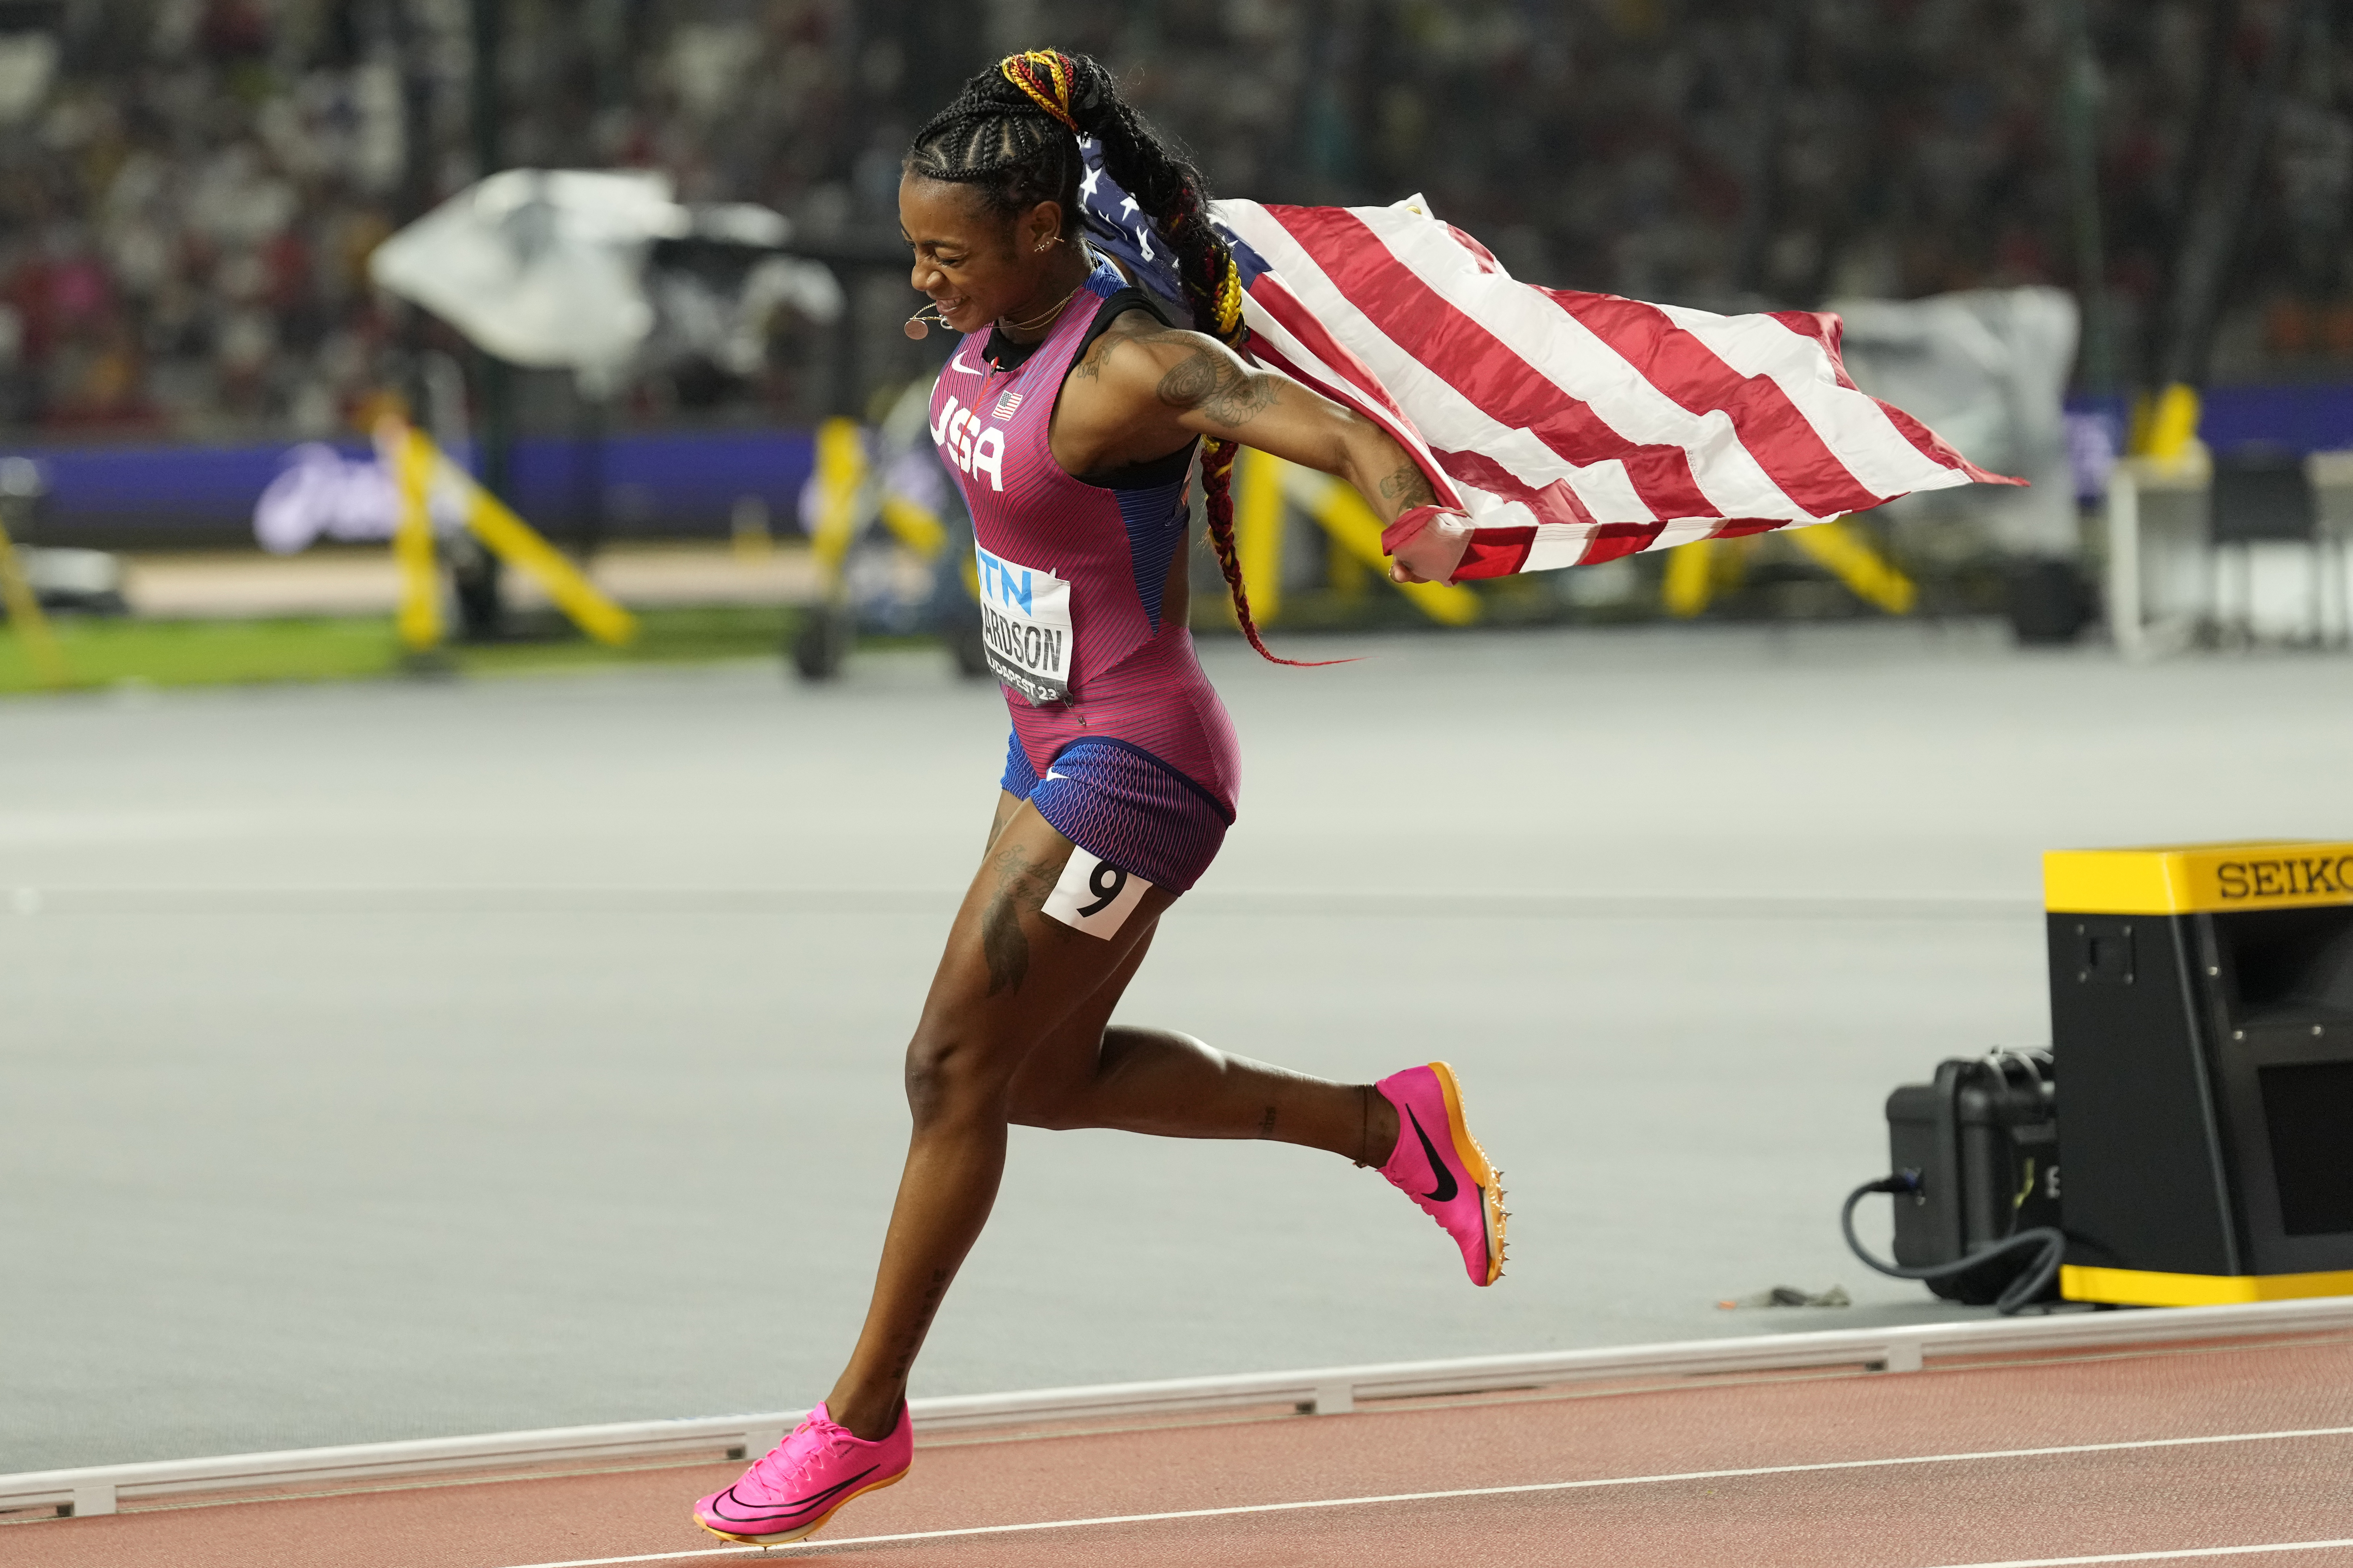 Track and field: All women's 100m world champions in the history